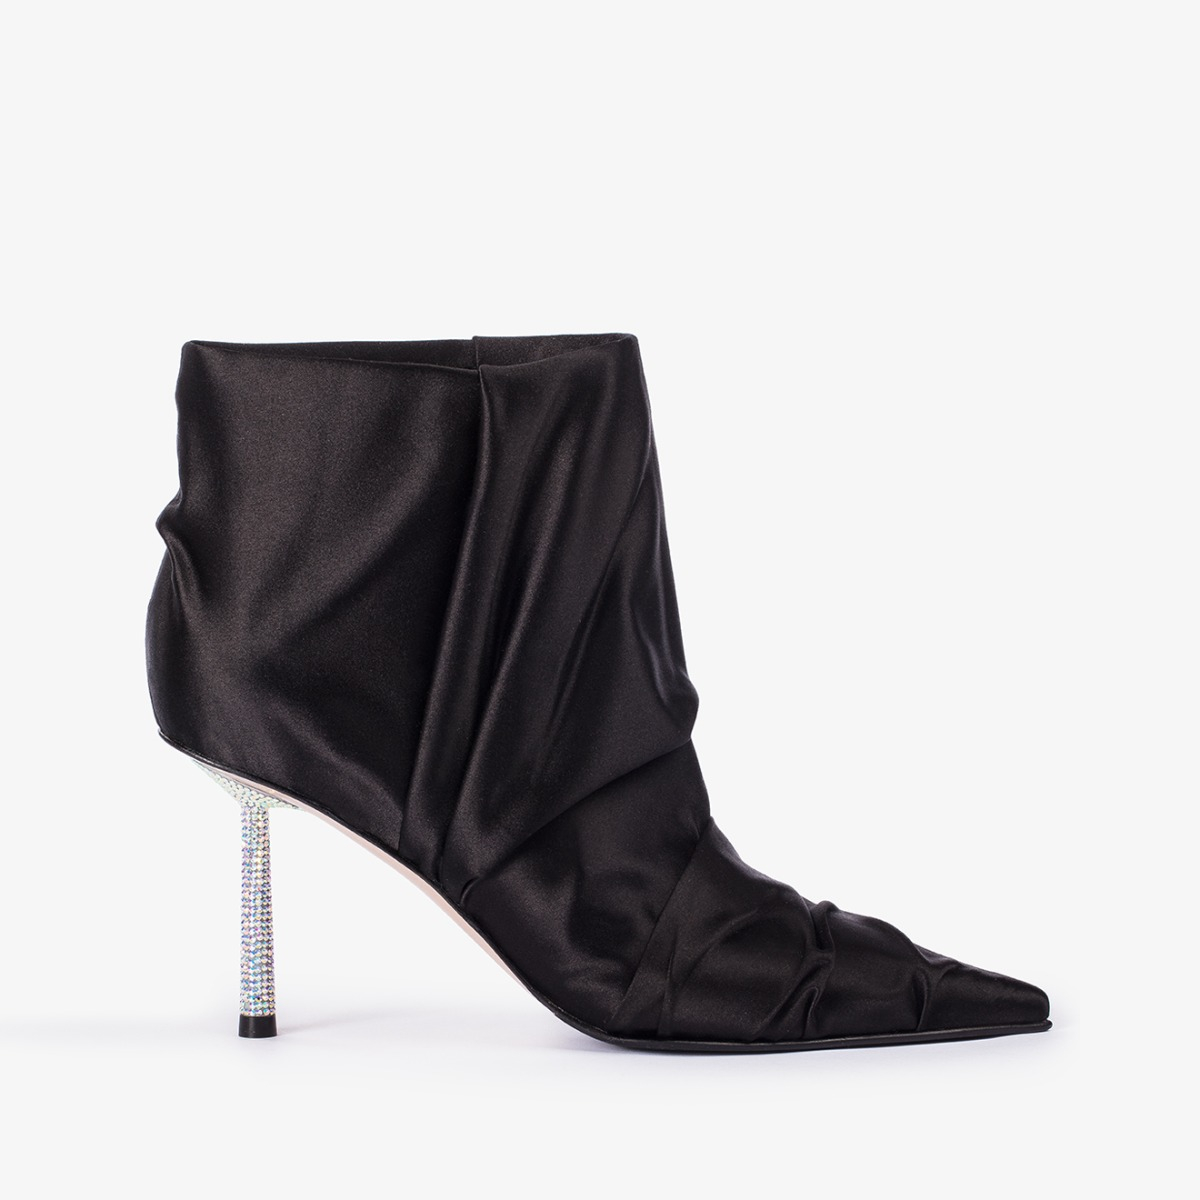 FEDRA ANKLE BOOT 80 mm - Le Silla | Official Online Store